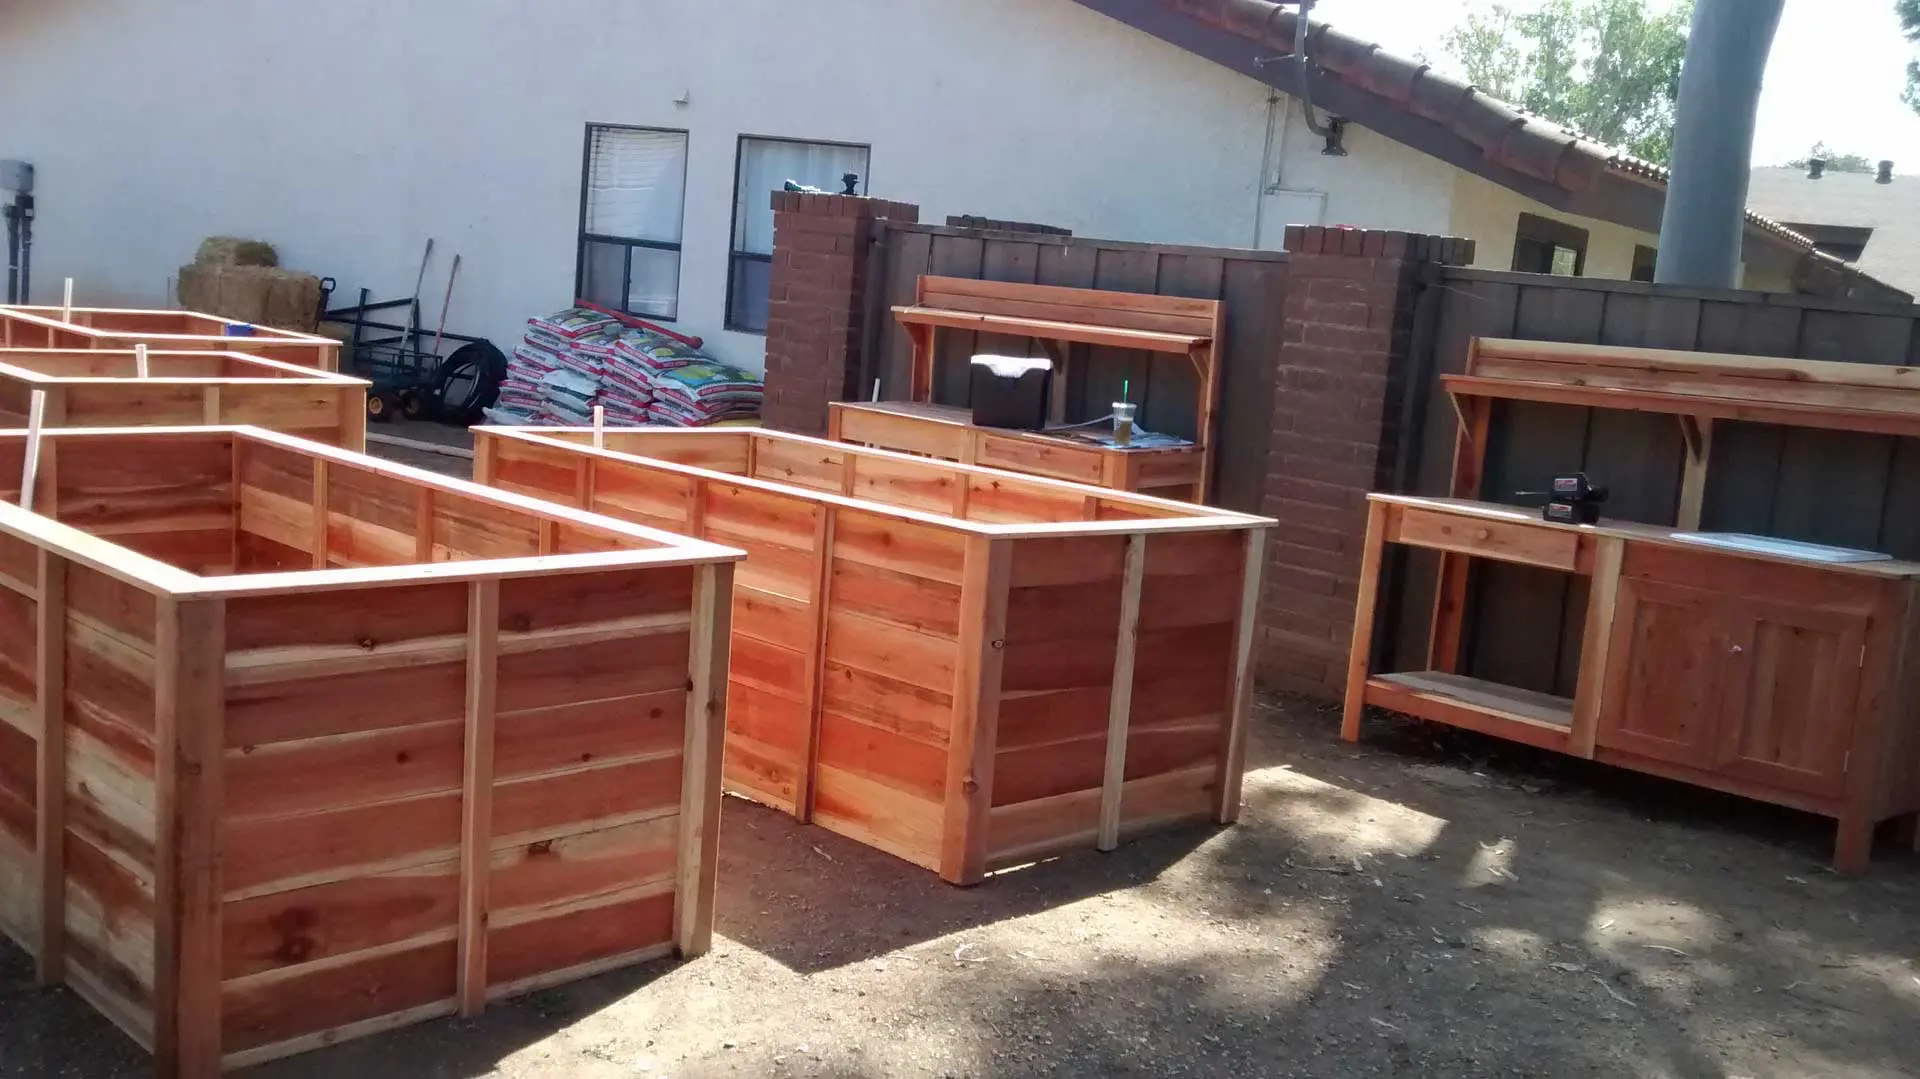 A set of wooden boxes in a backyard.